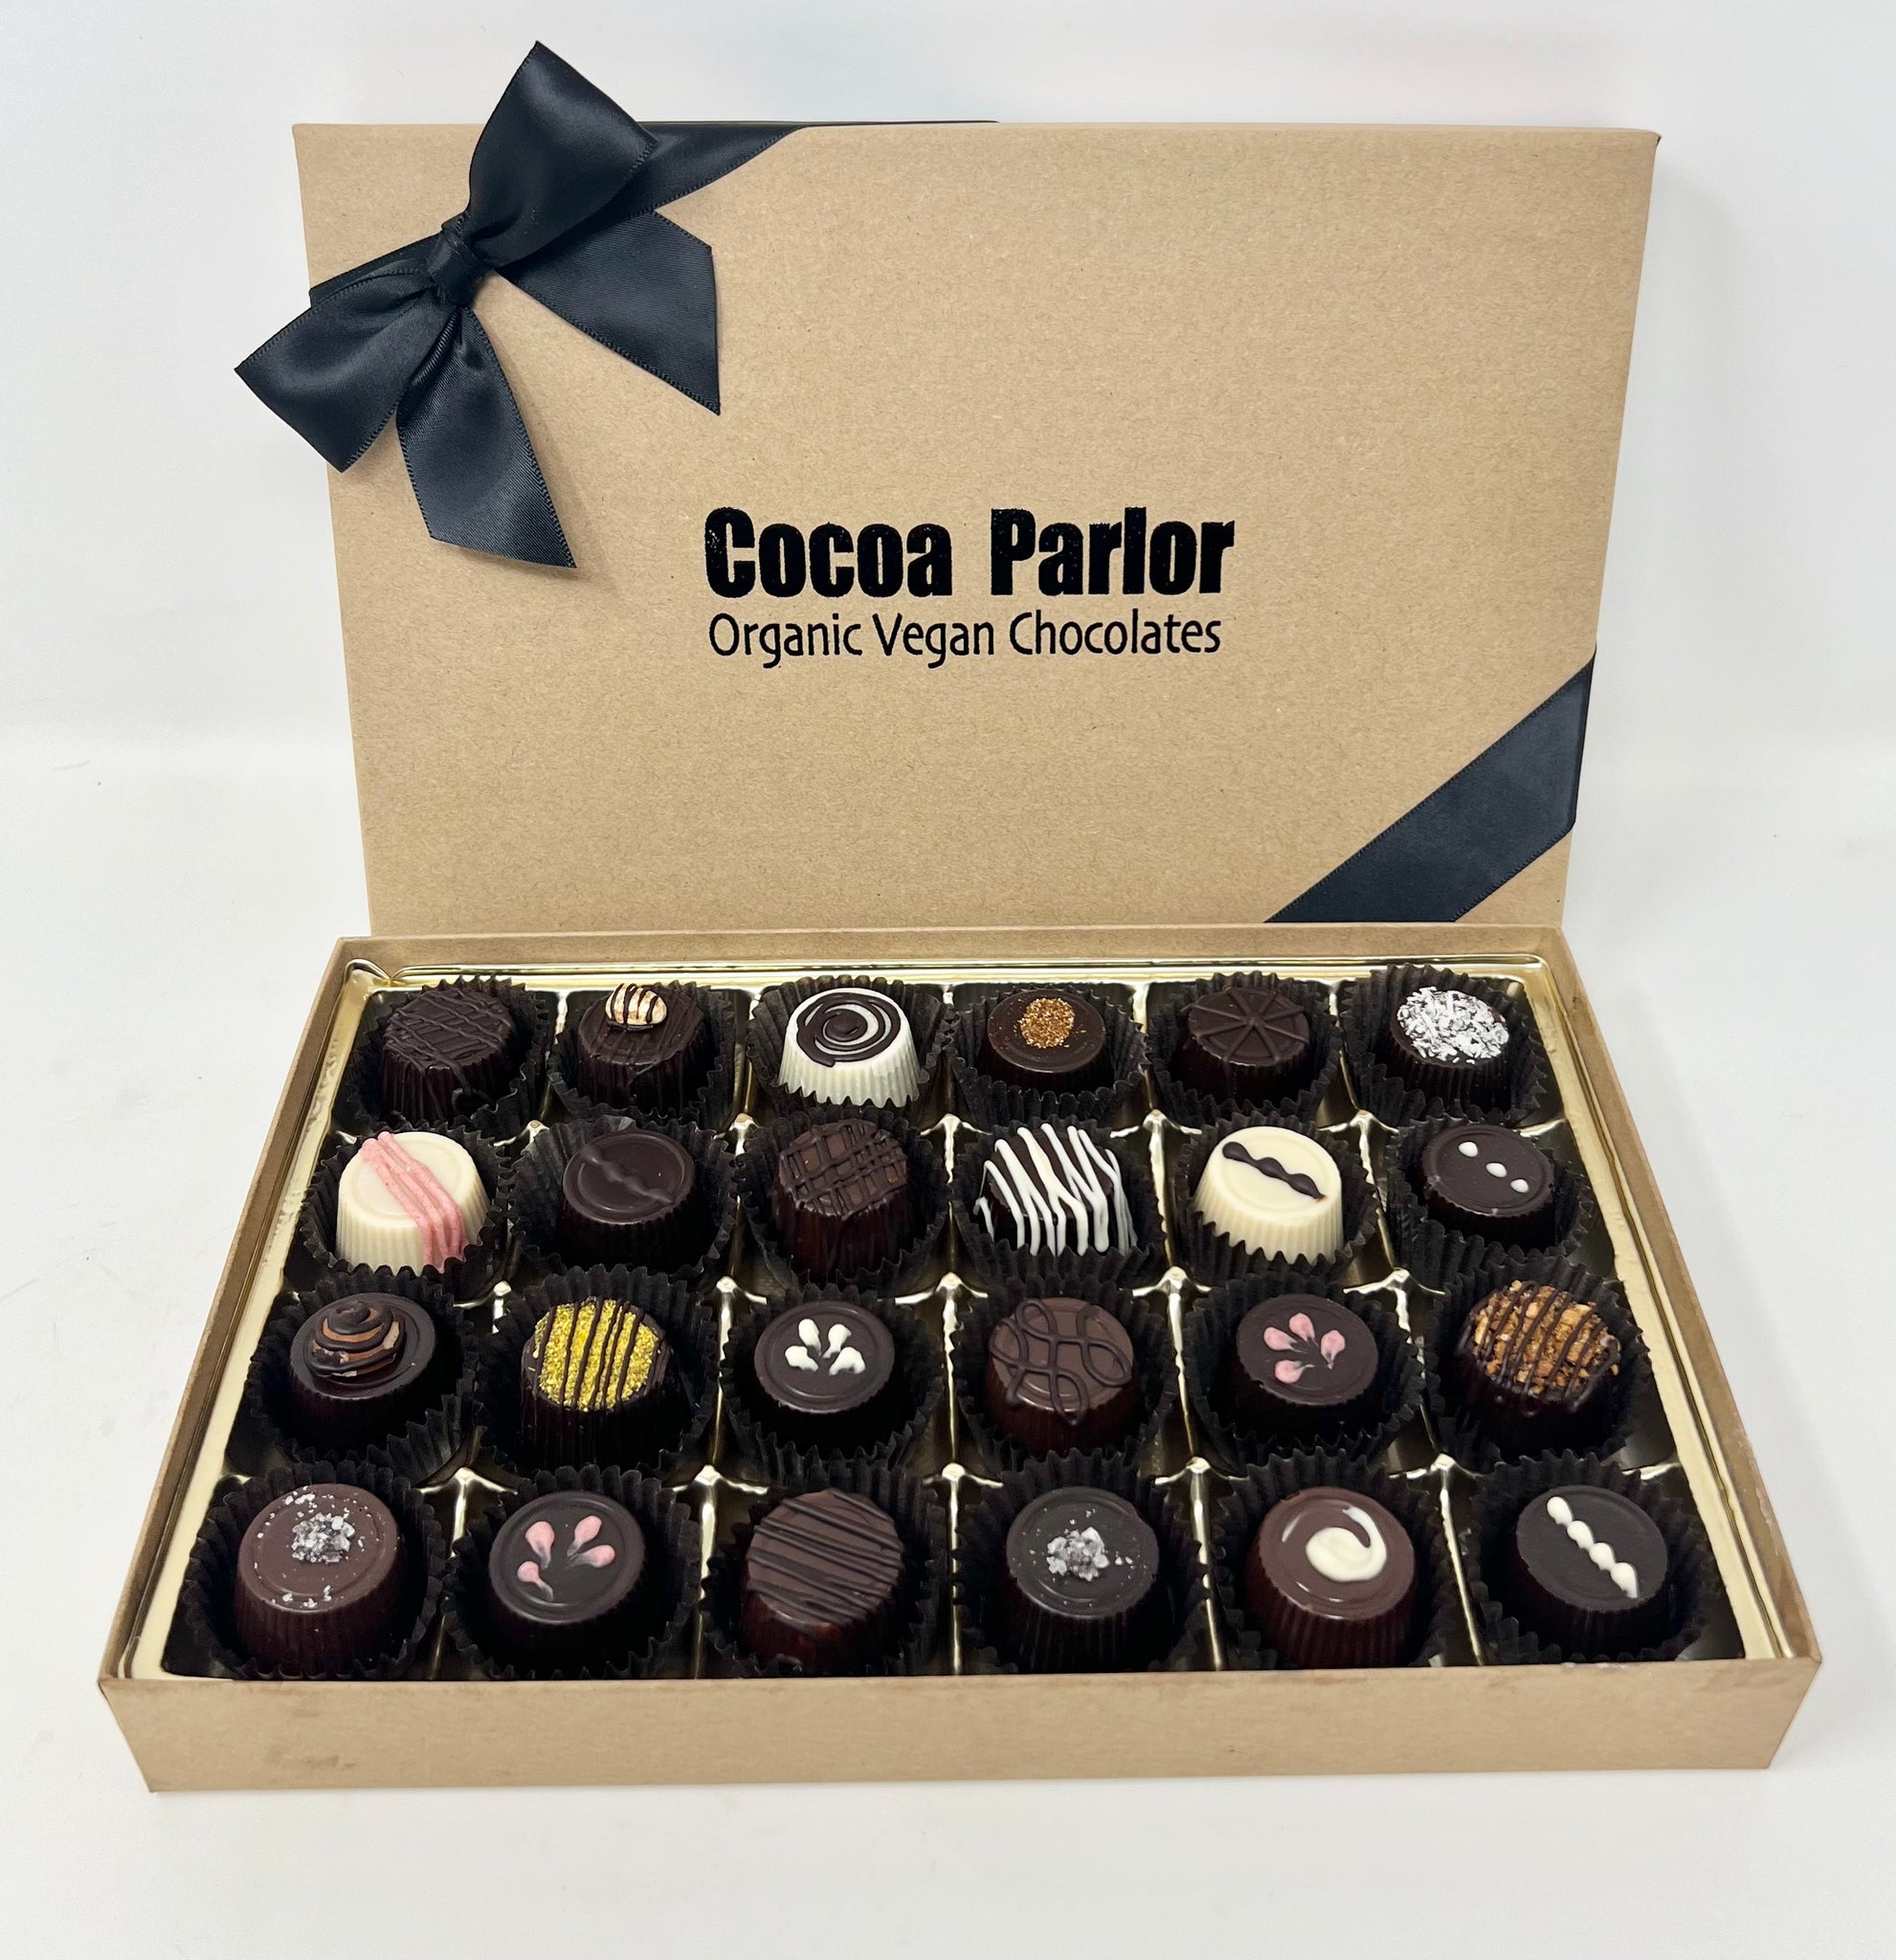 One of Every Creation in this 24-piece Truffle Box